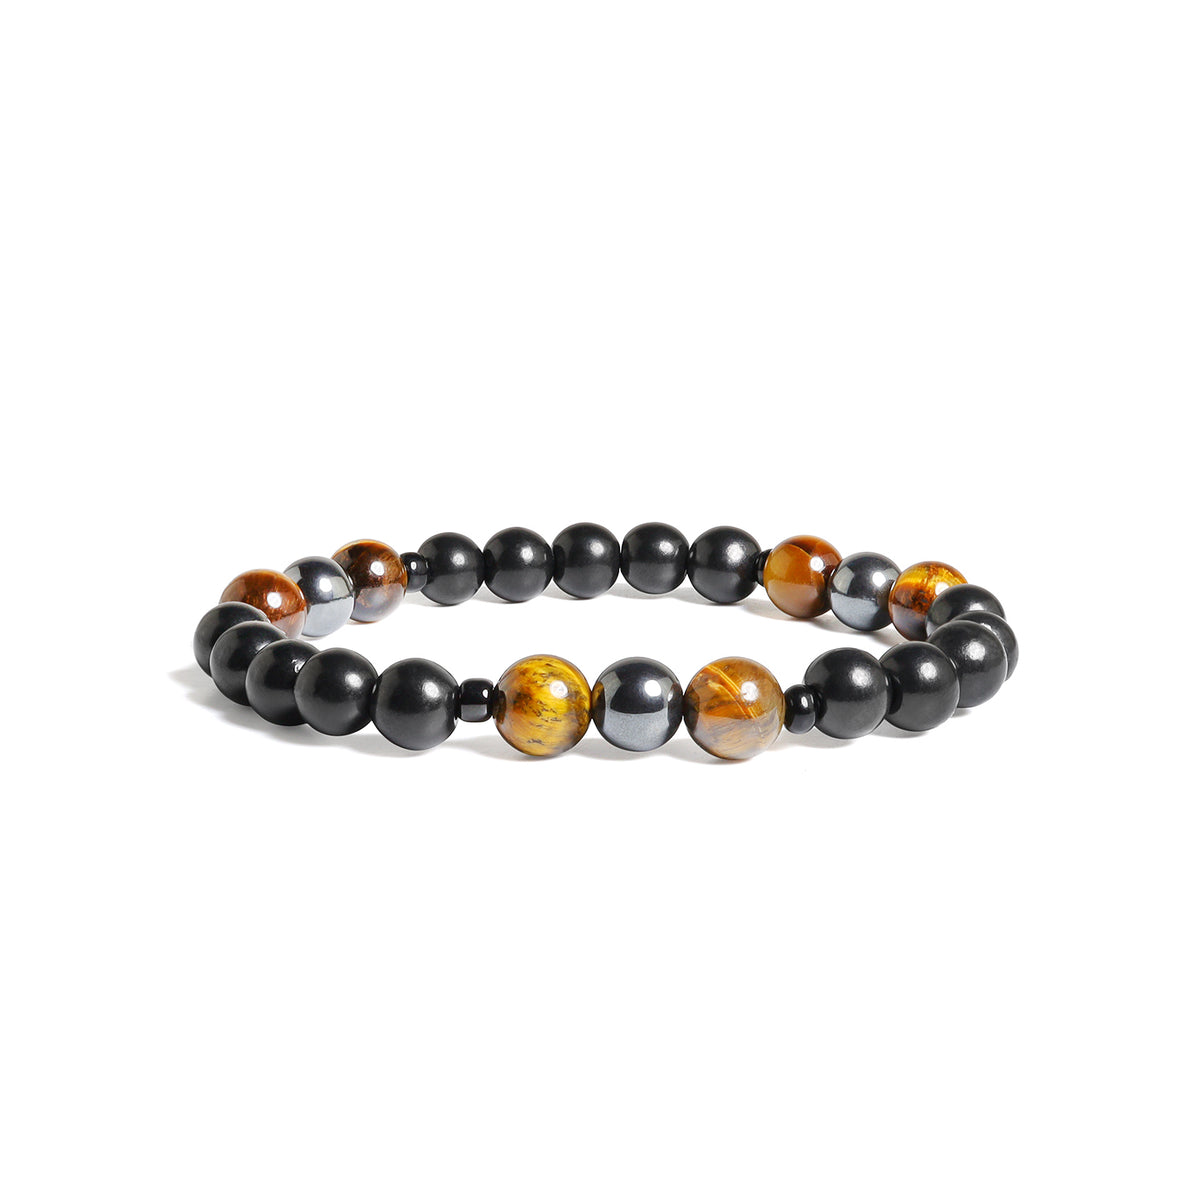 This beautiful XS bracelet includes three of the most powerful 6mm stones: tiger's eye, hematite and shungite.